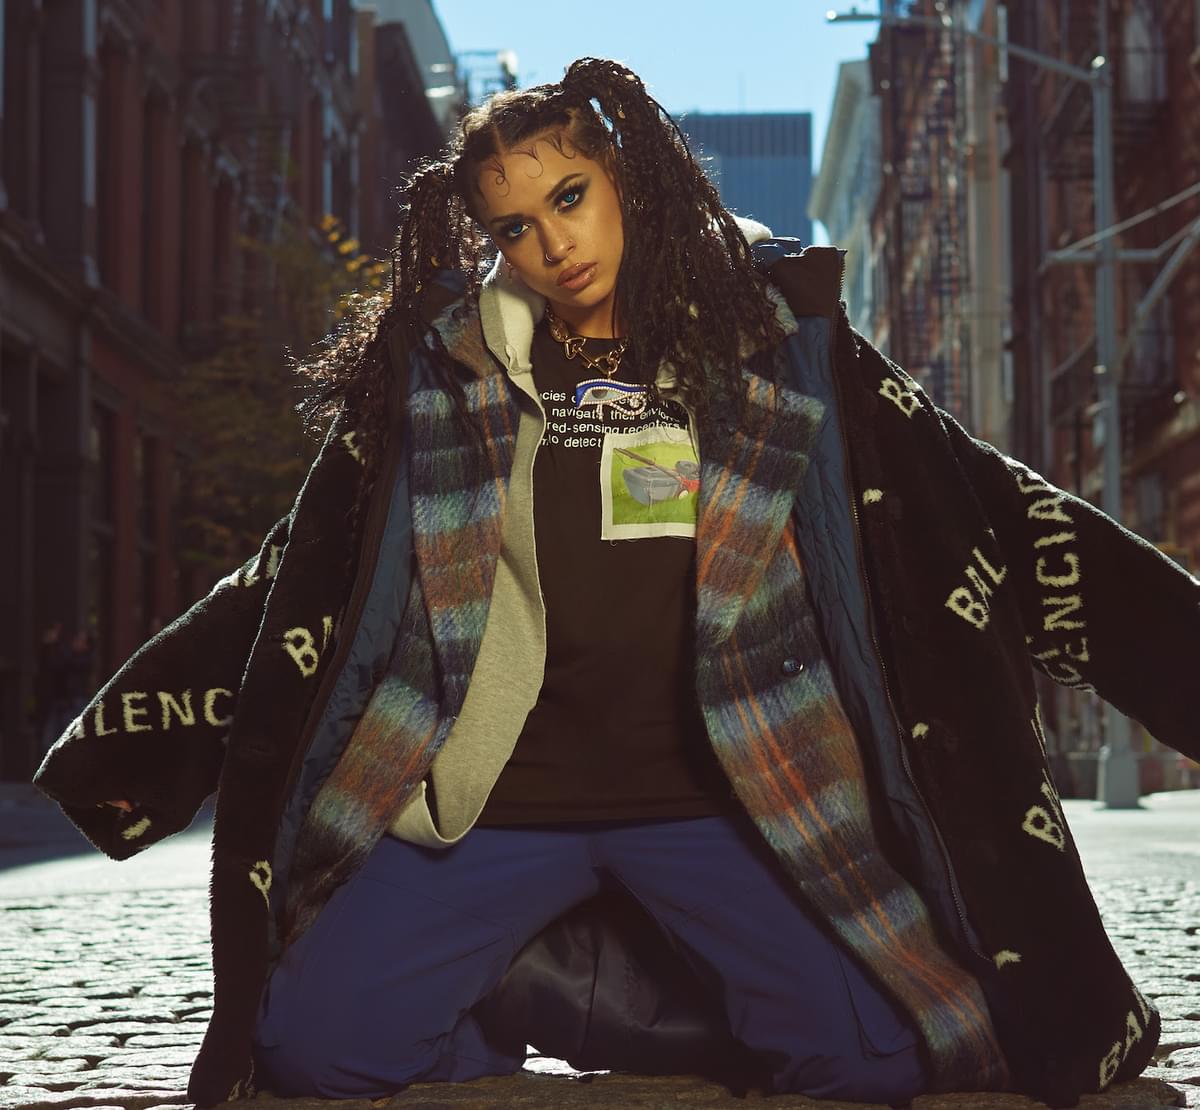 Princess Nokia drops the designer labels on track "Balenciaga" | The of Best Fit